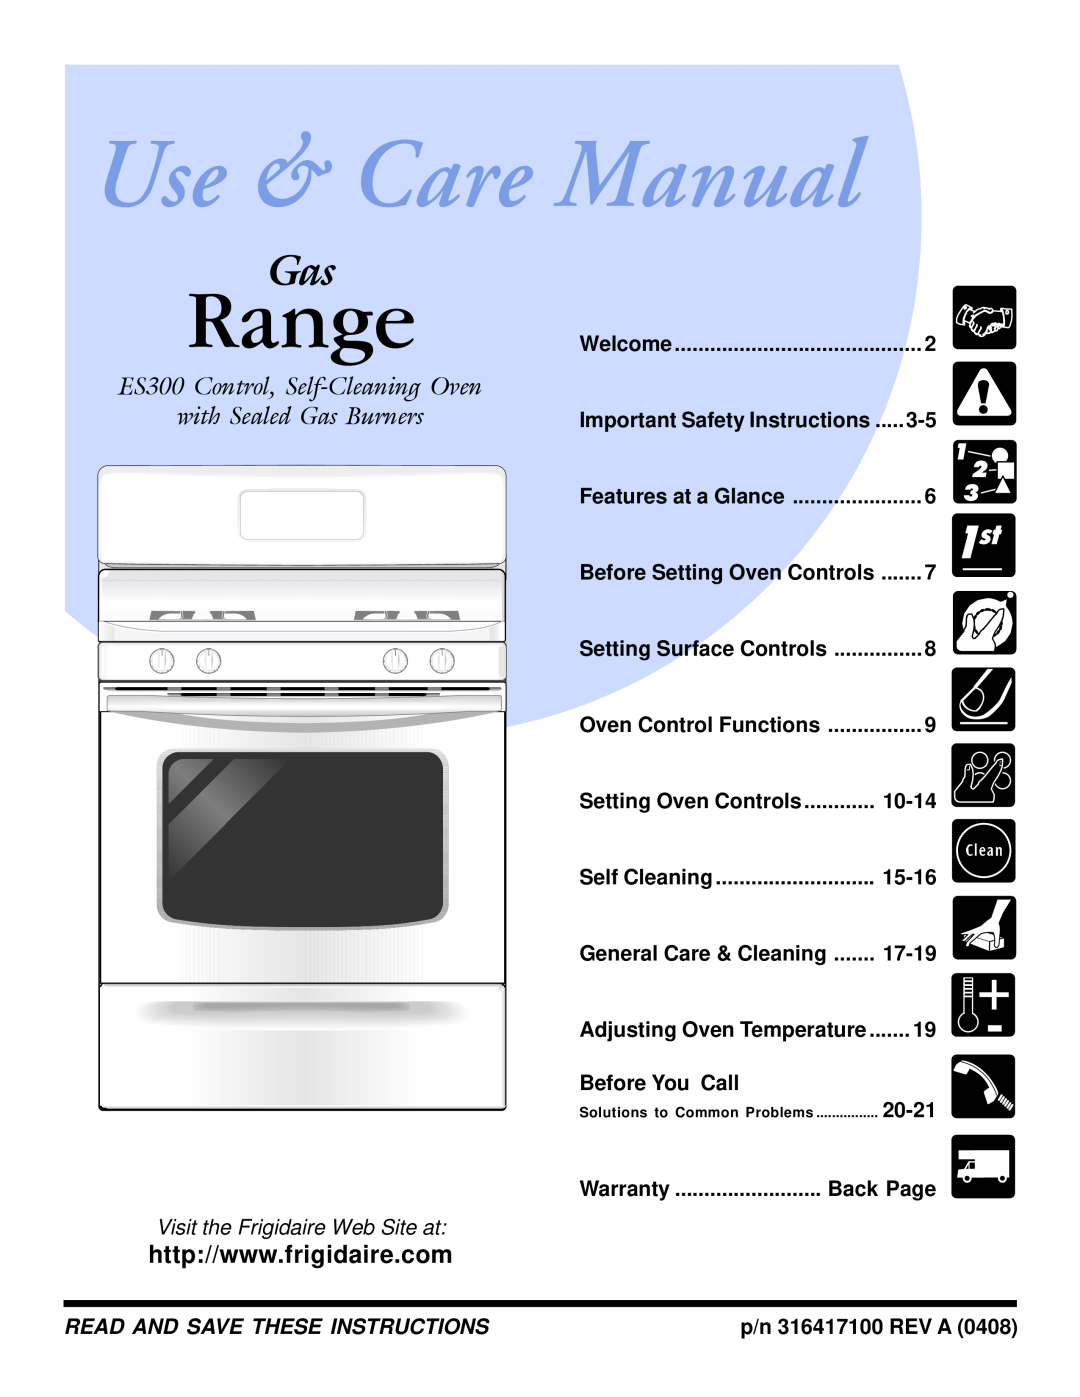 Frigidaire ES300 manual Important Safety Instructions, Before Setting Oven Controls, Setting Surface Controls, 10-14 